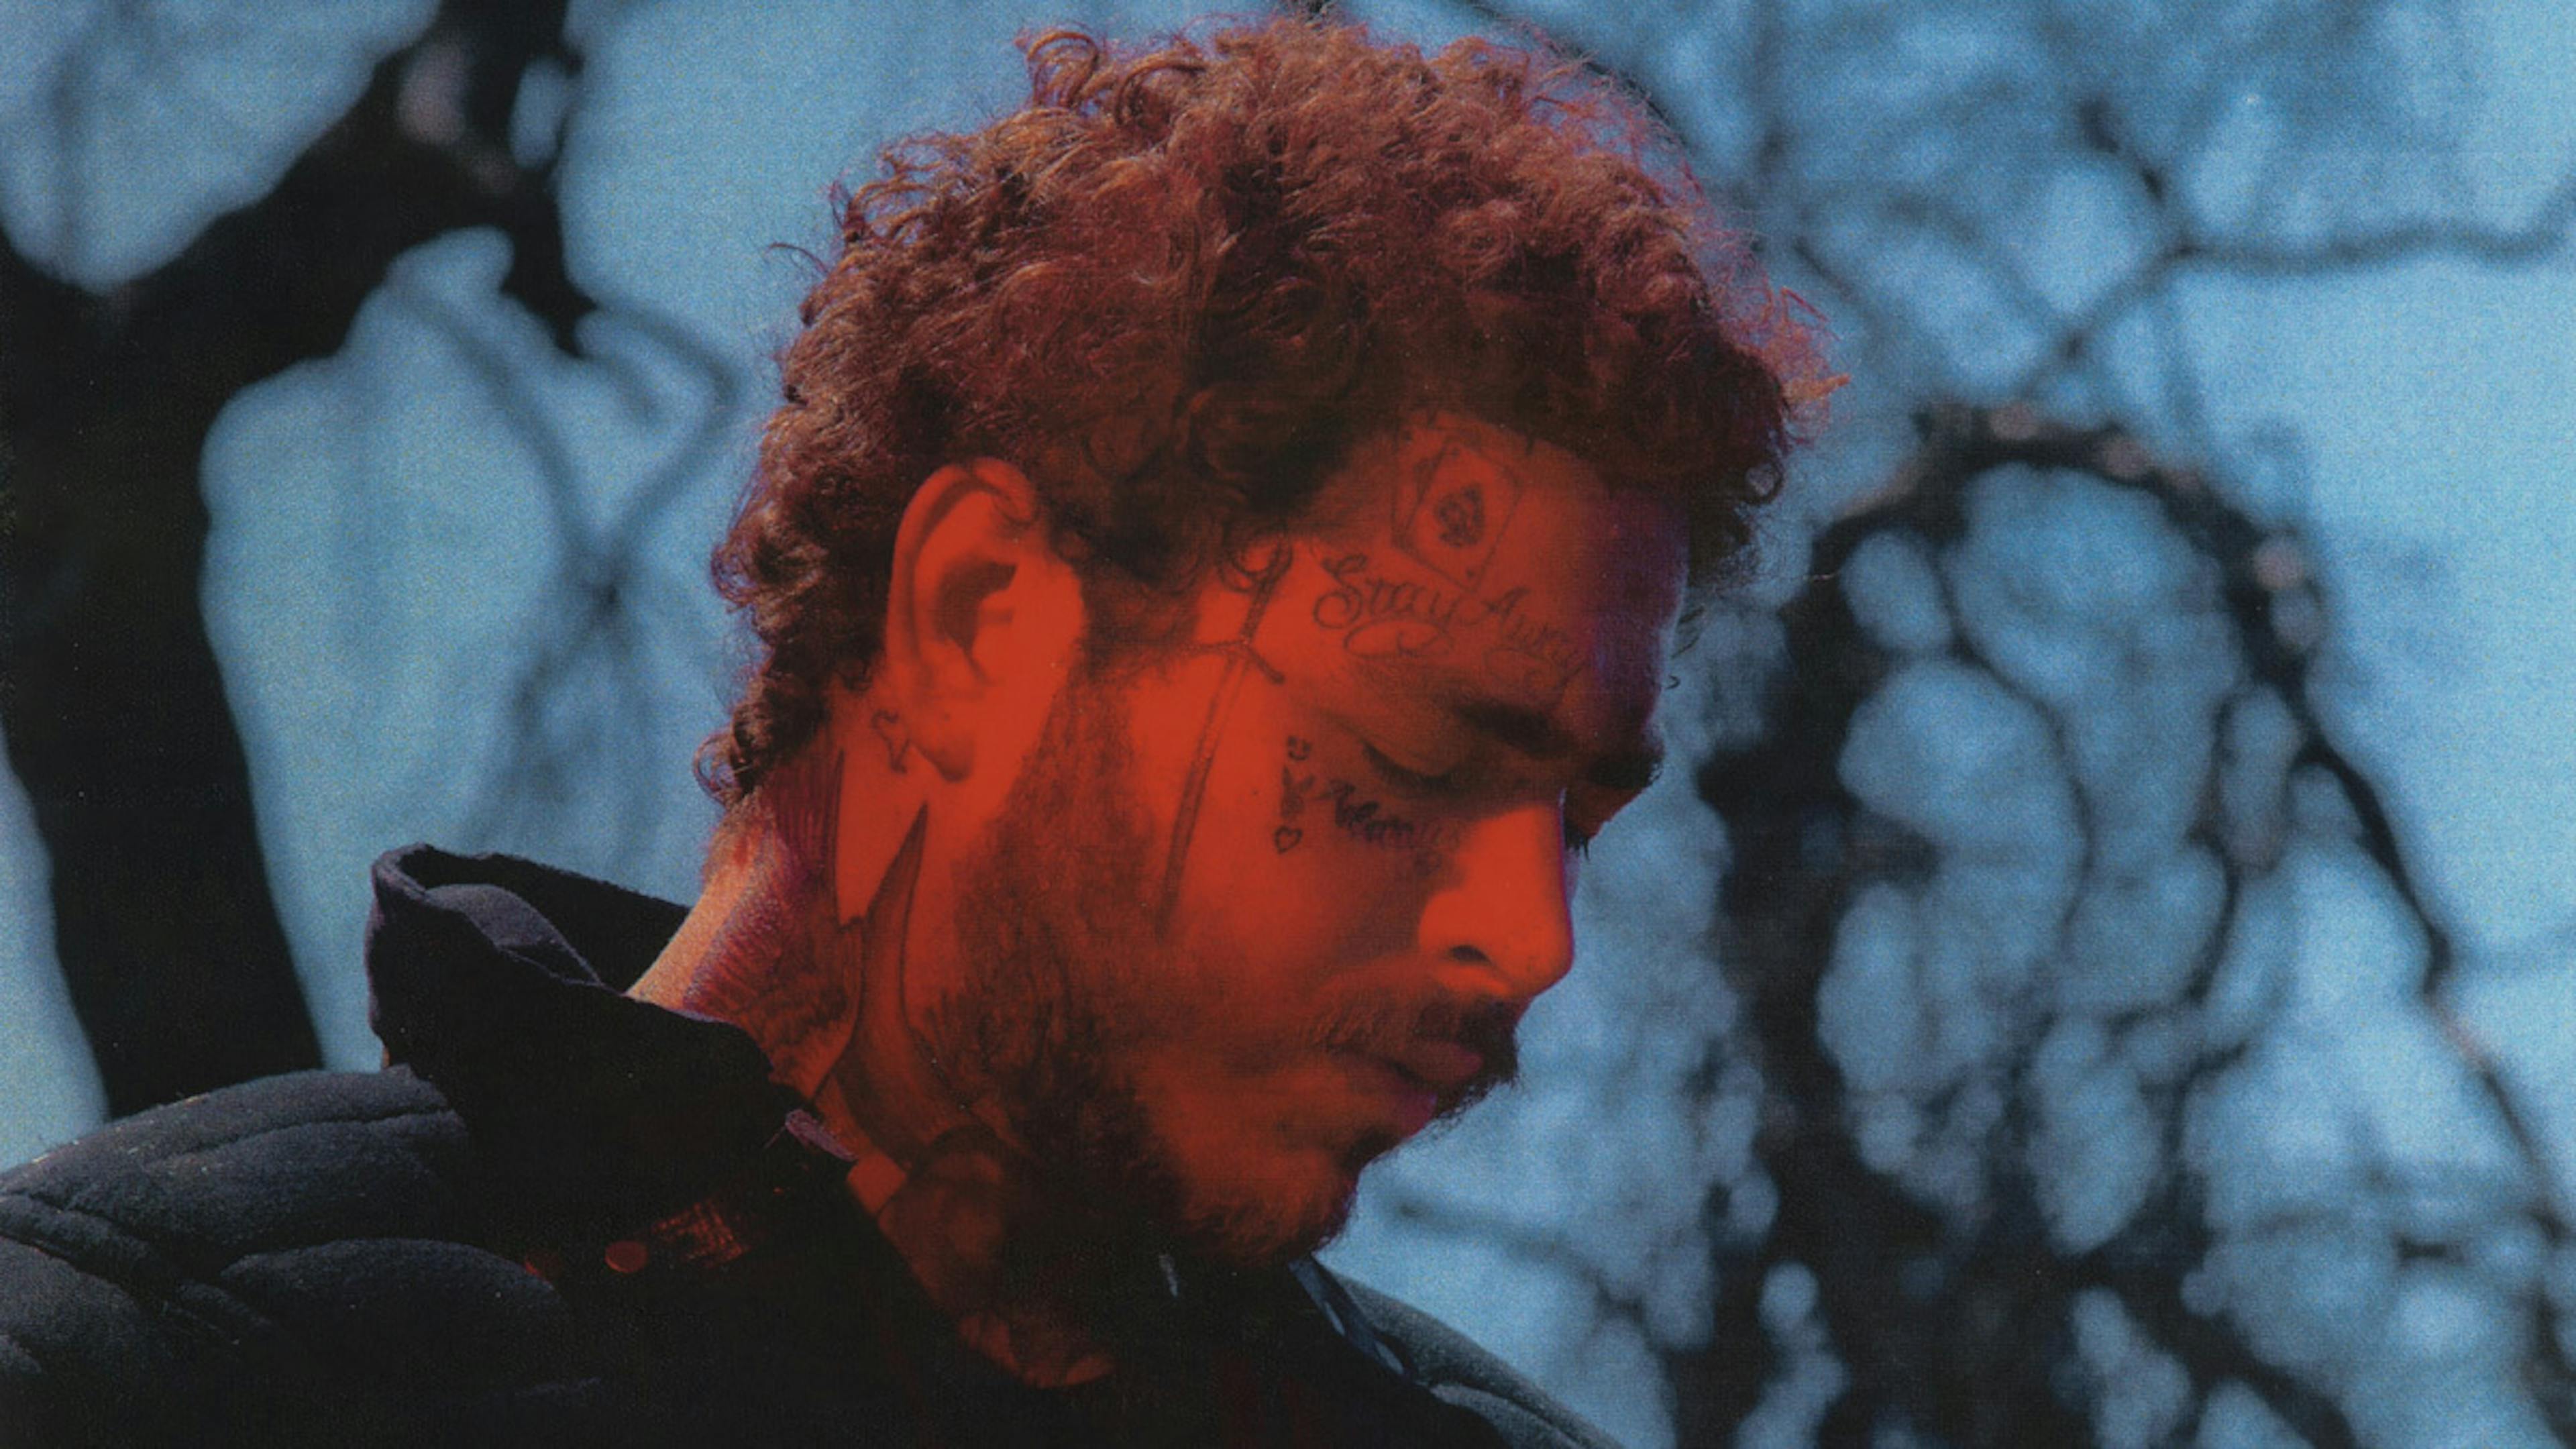 Check out a snippet of Post Malone’s new single, Motley Crew